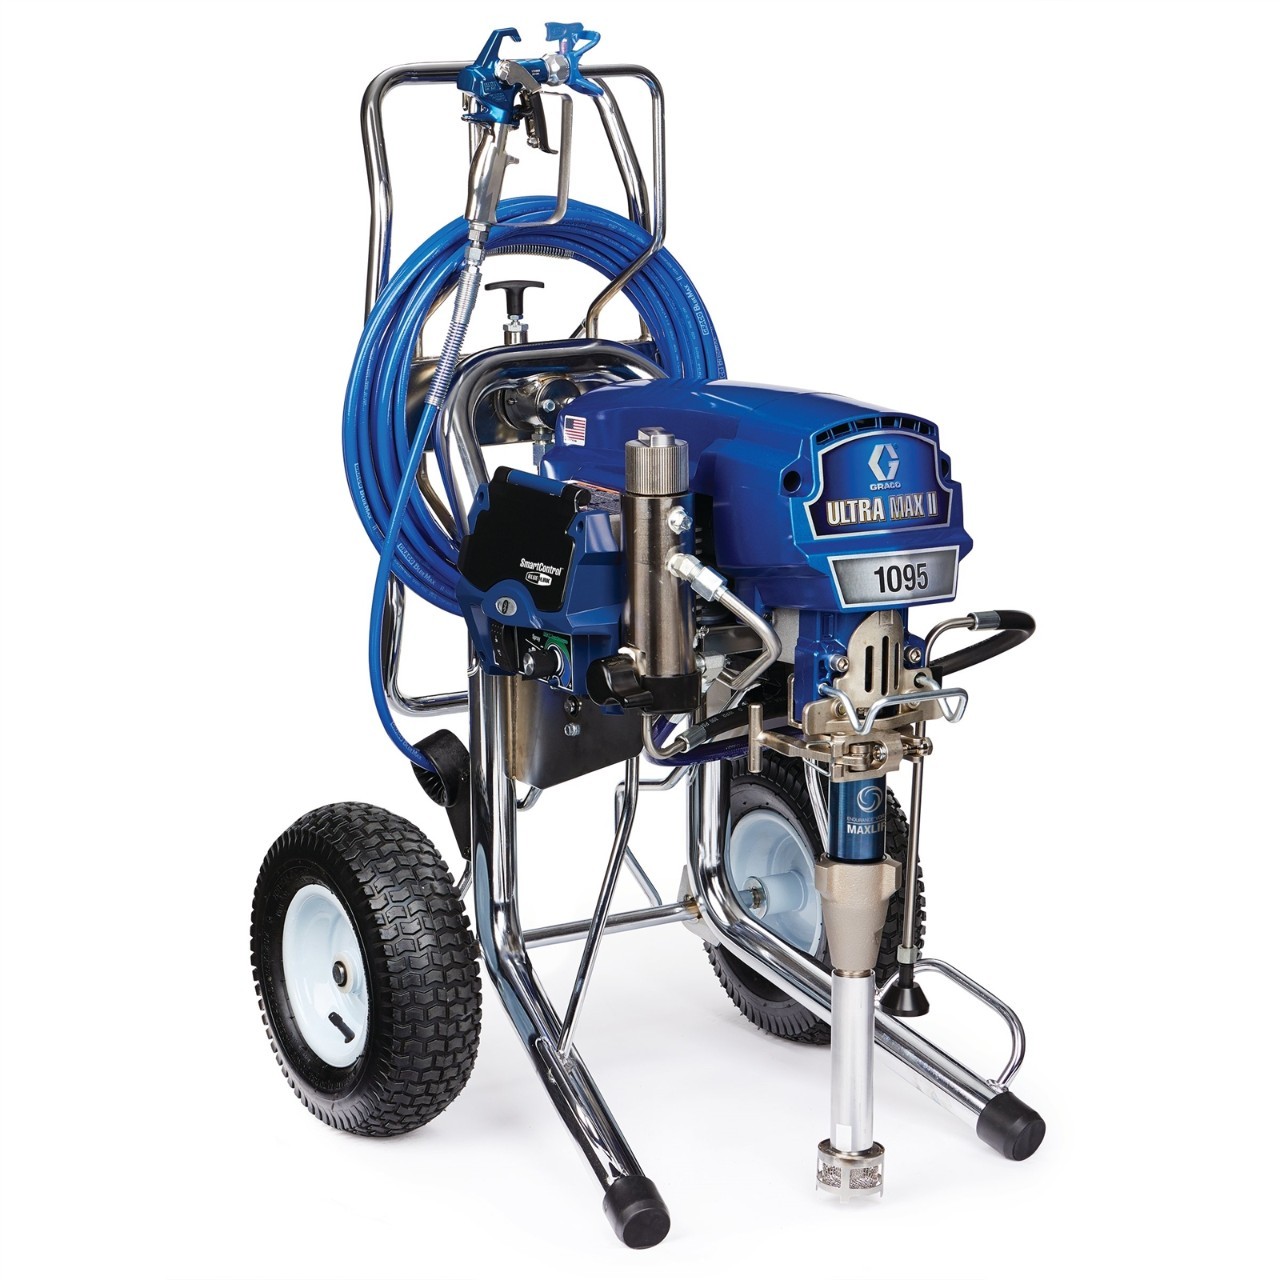 Graco Ultra Max II 1095 ProContractor Series Electric Airless Sprayer Parts